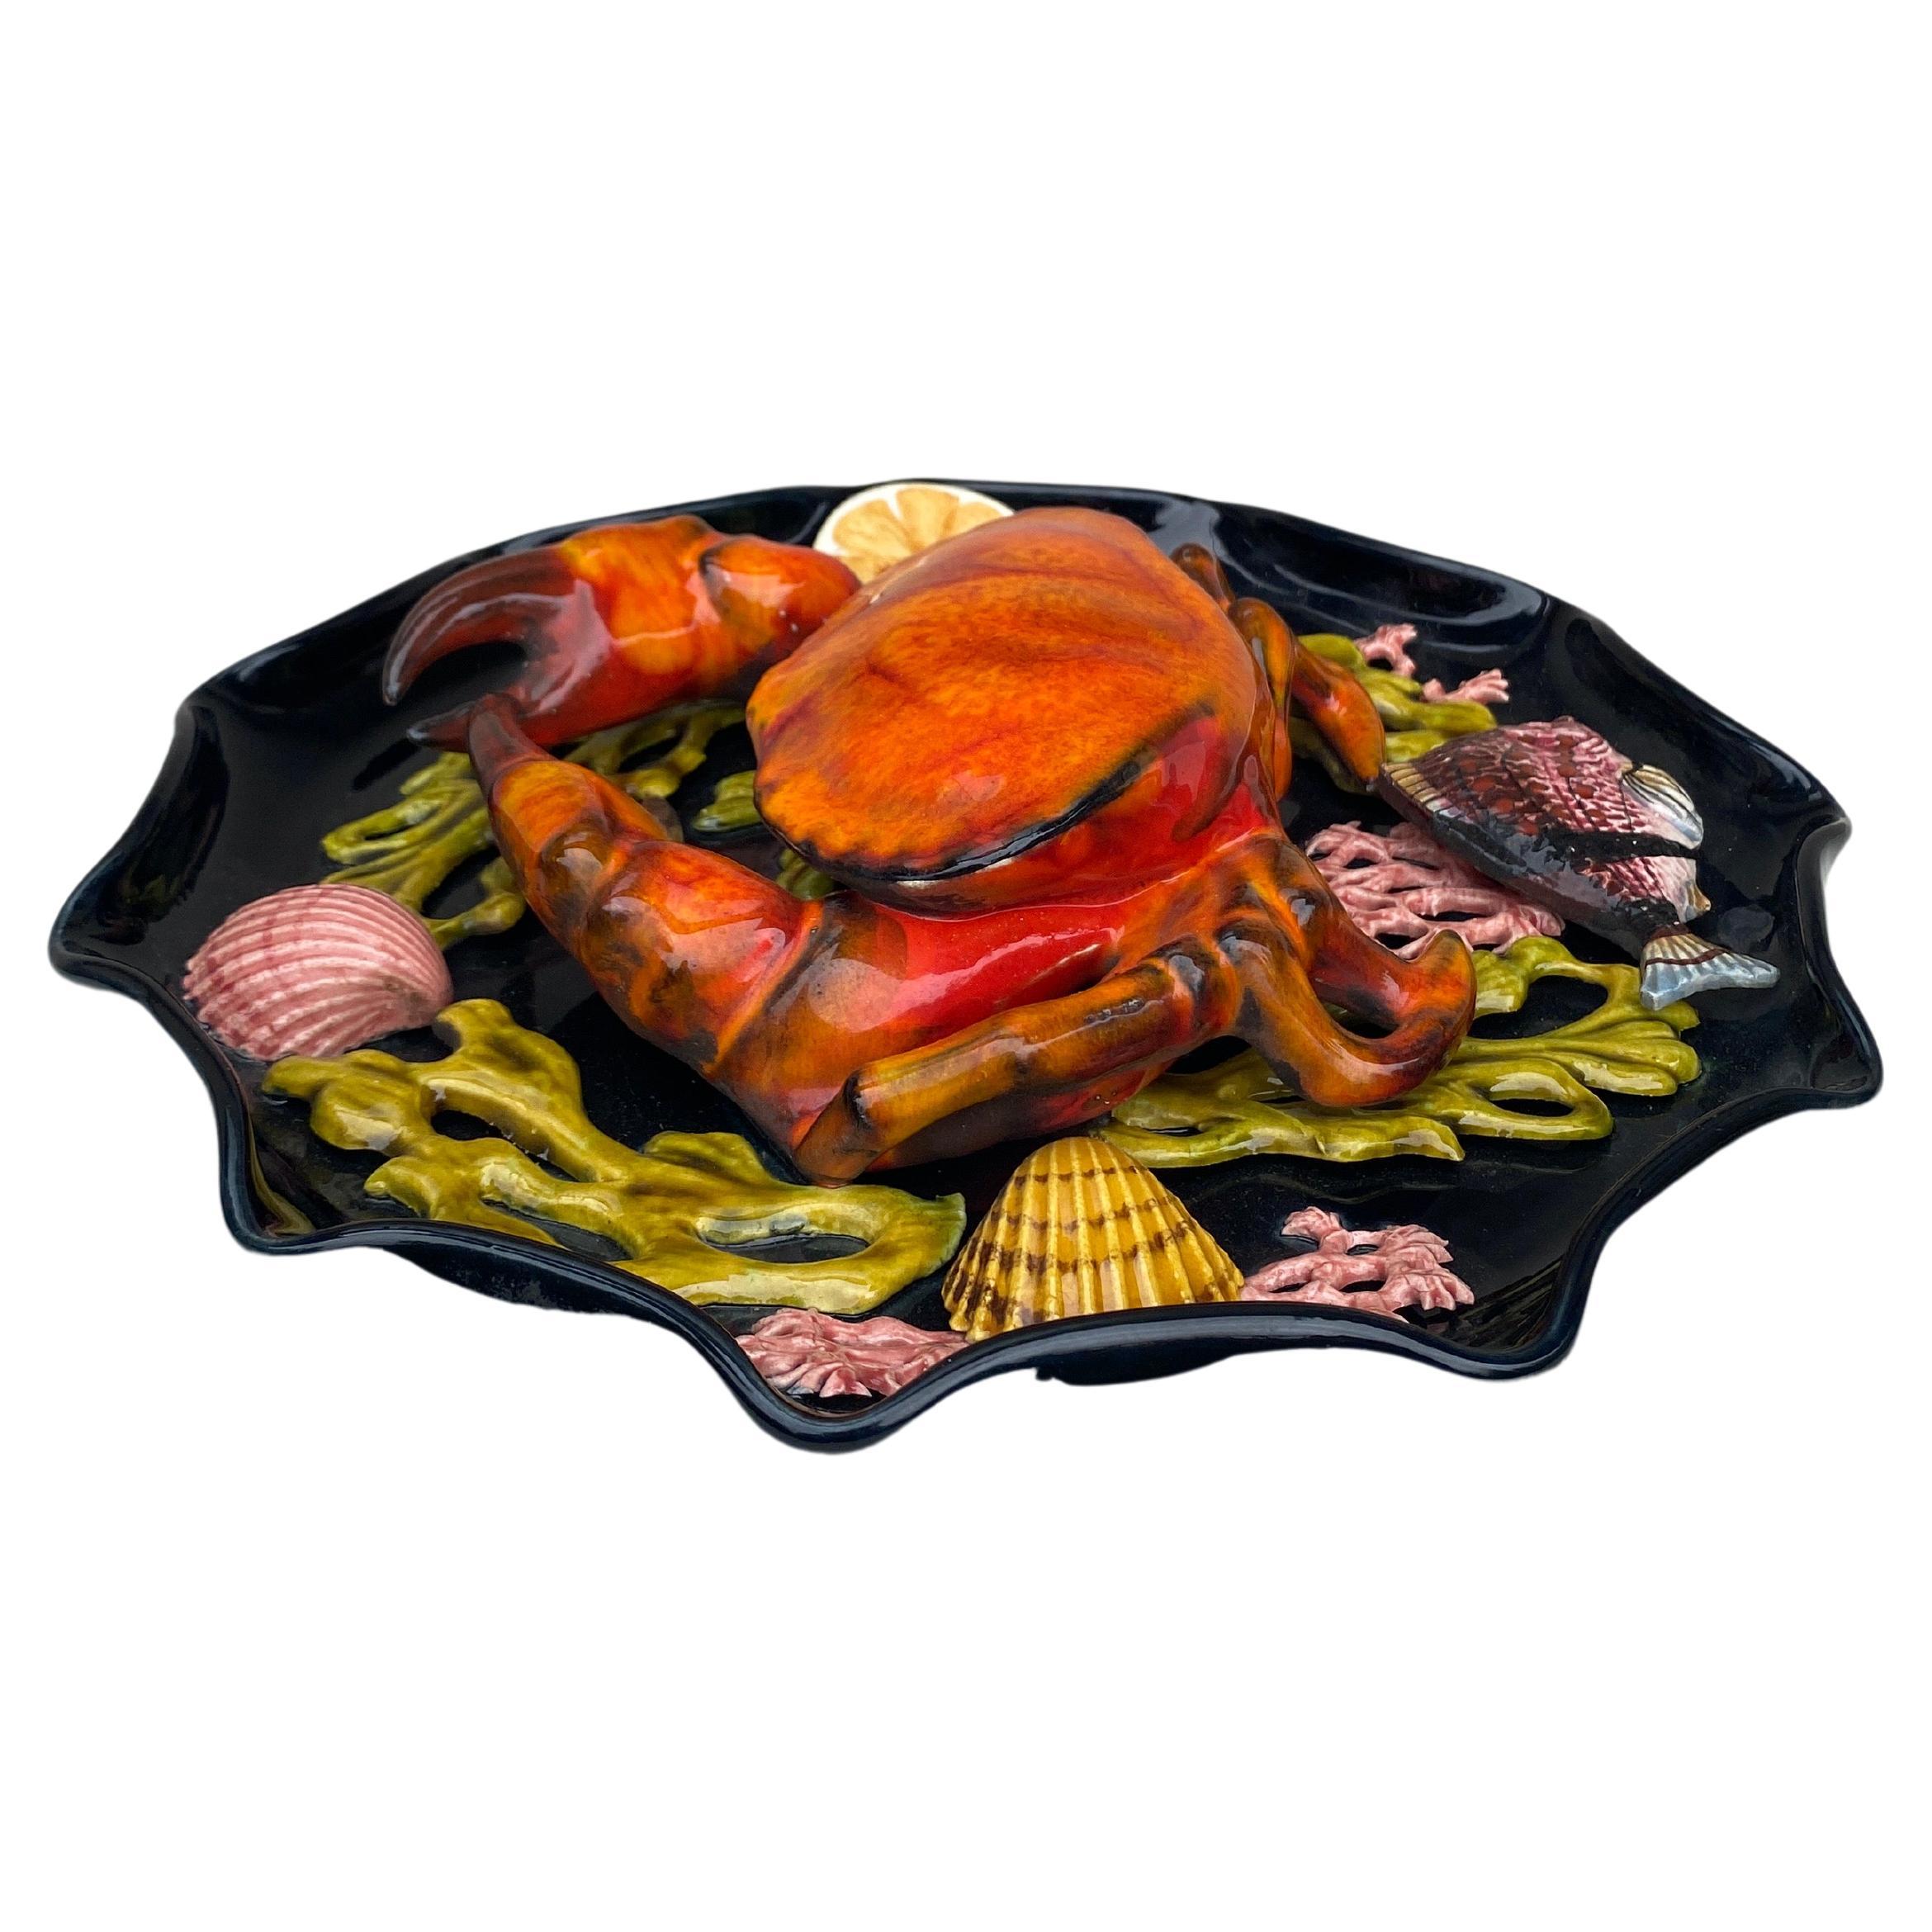 Large Majolica wall platter Vallauris, circa 1950.
A large crab in high relief on the center surrounded by seaweeds, one fish, shells and a slice of lemon.